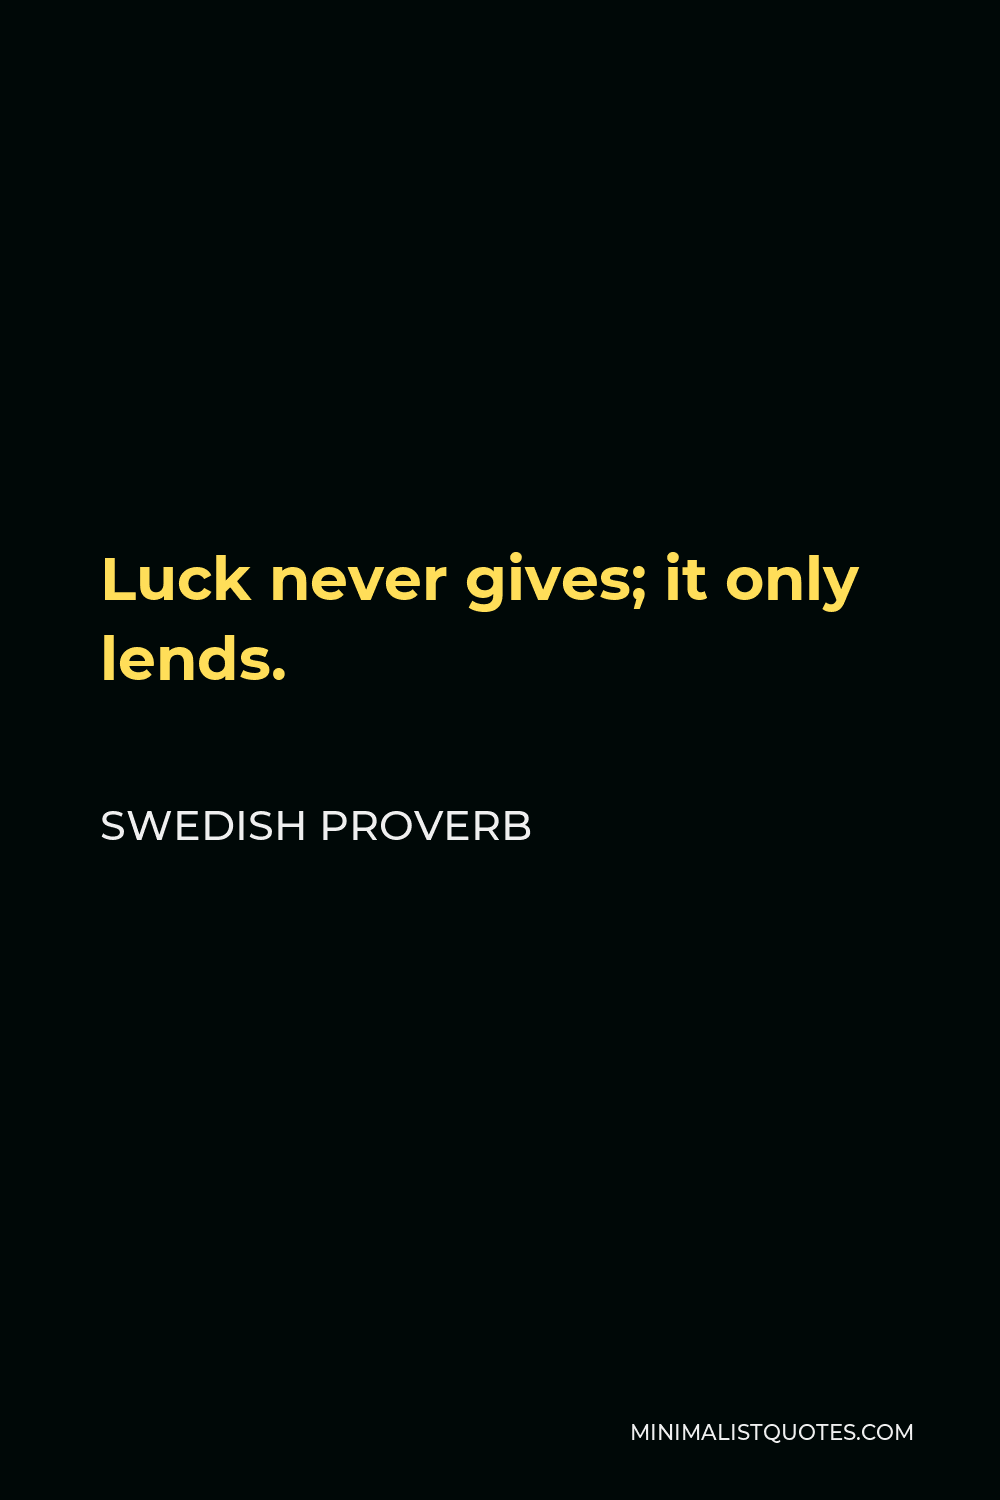 Swedish Proverb Quote - Luck never gives; it only lends.